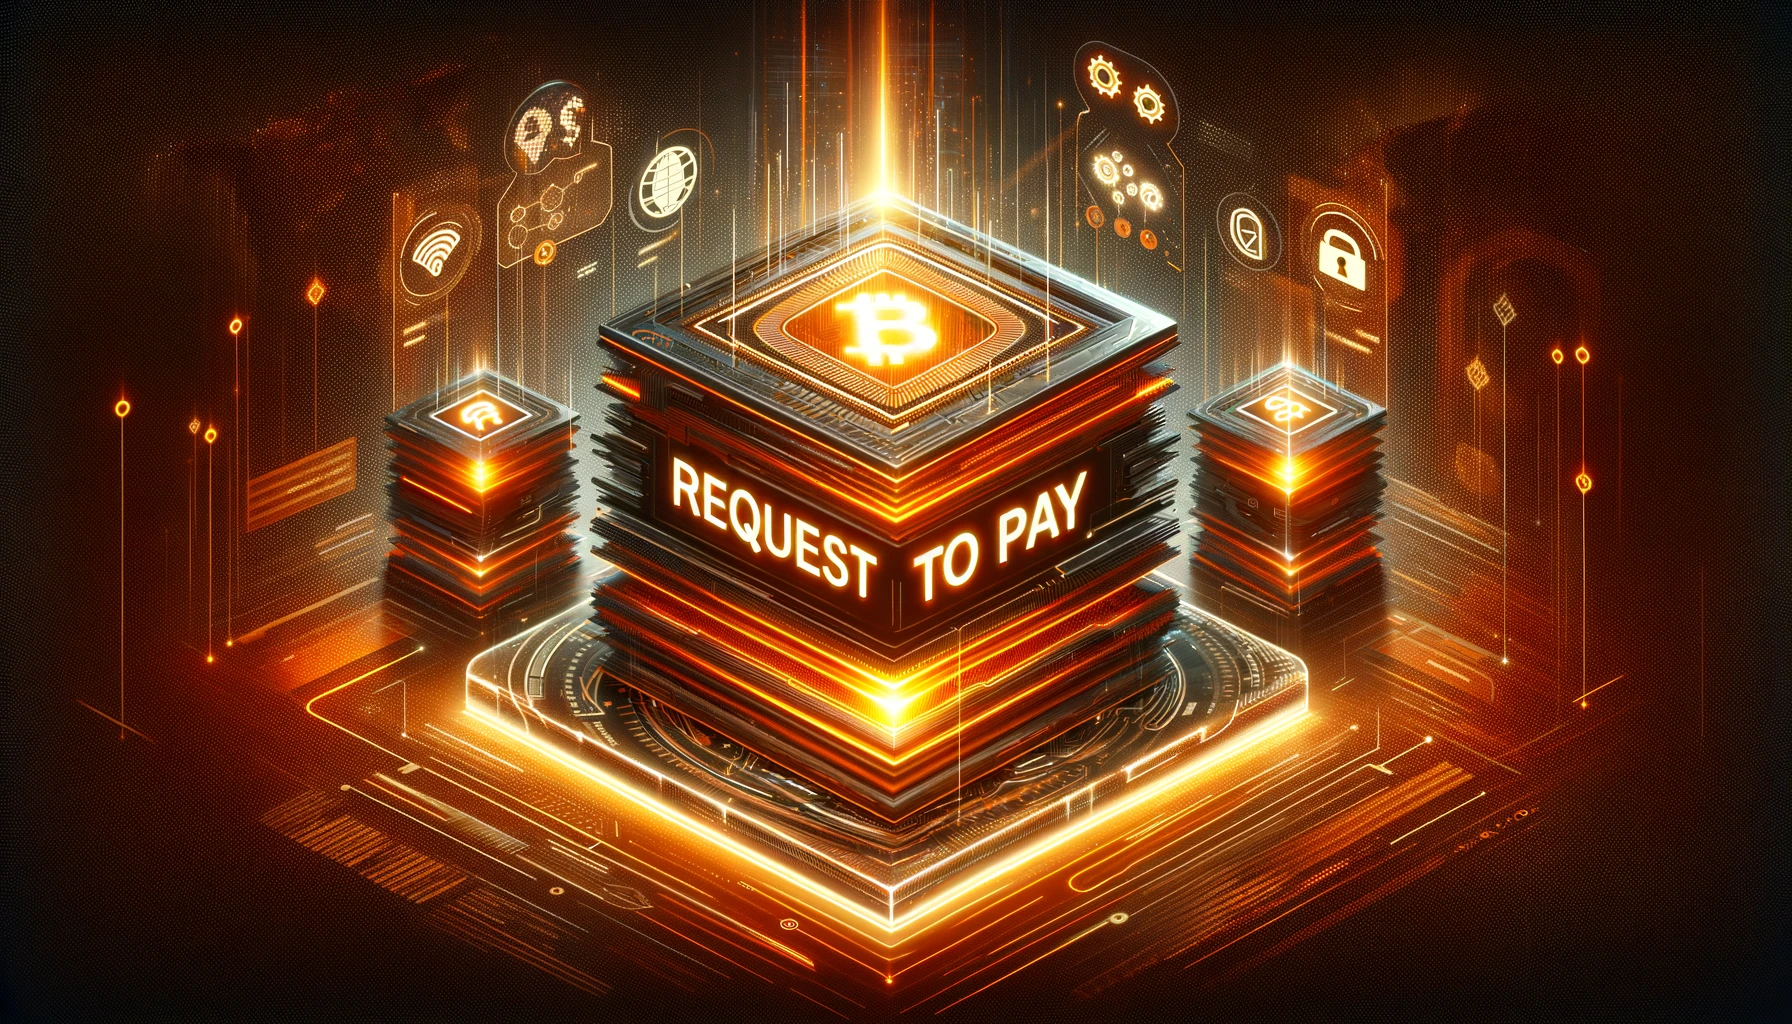 Request to Pay